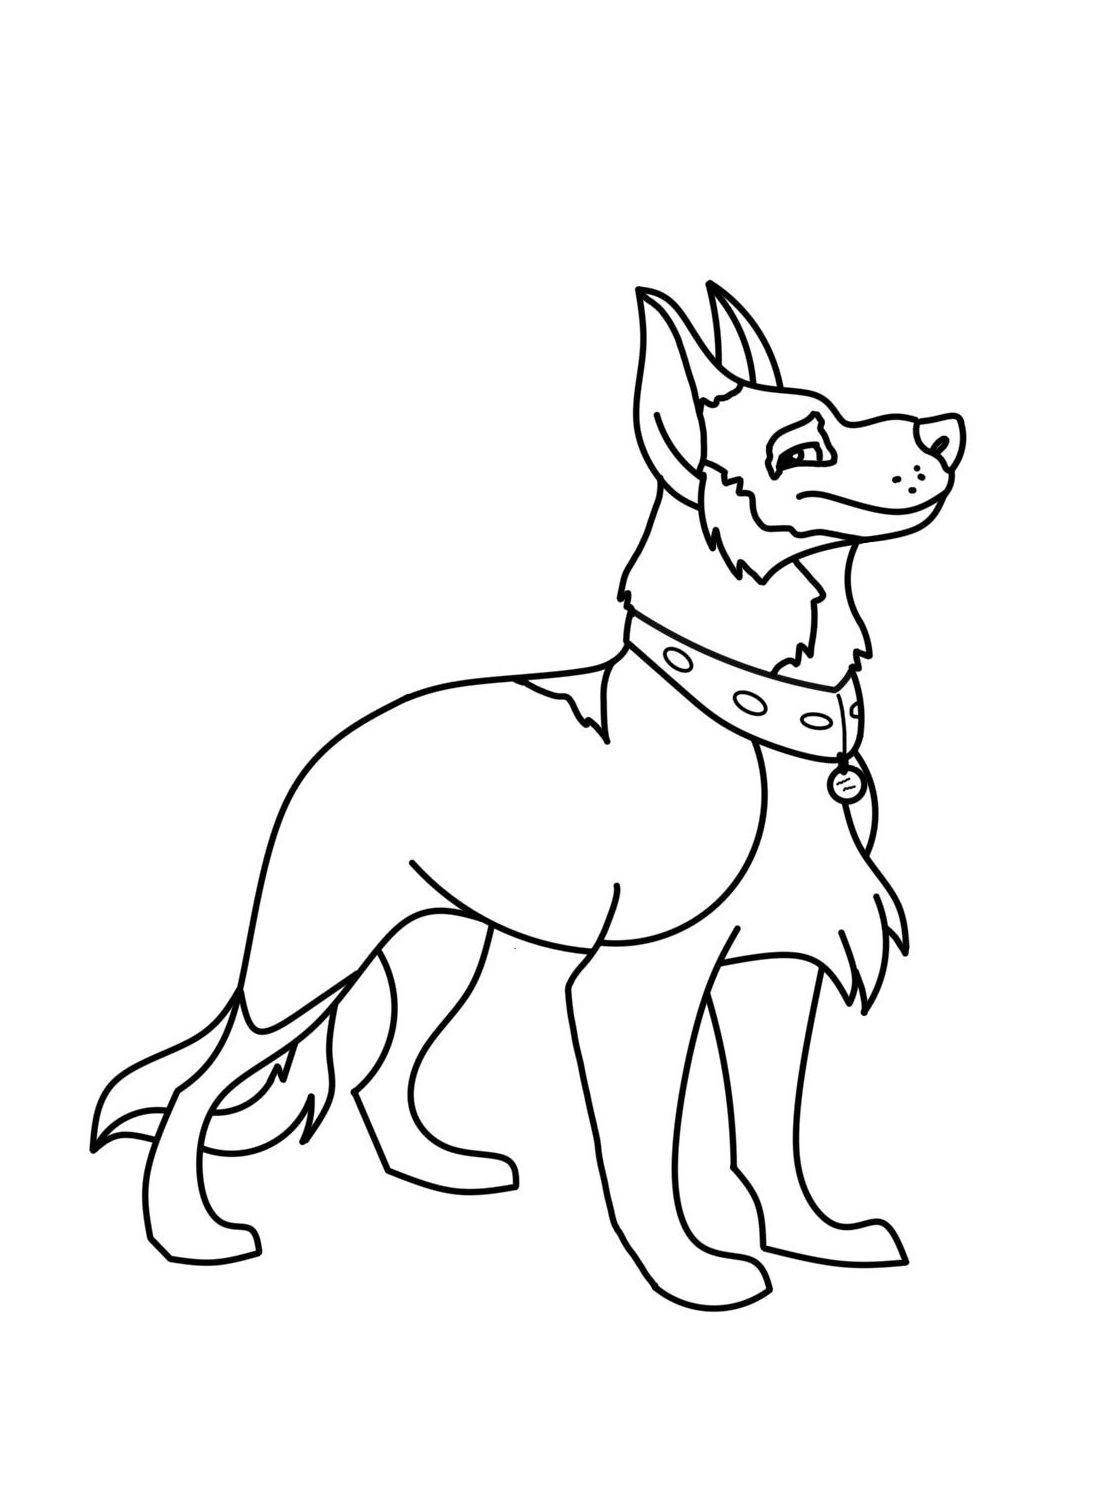 realistic german shepherd dog coloring pages